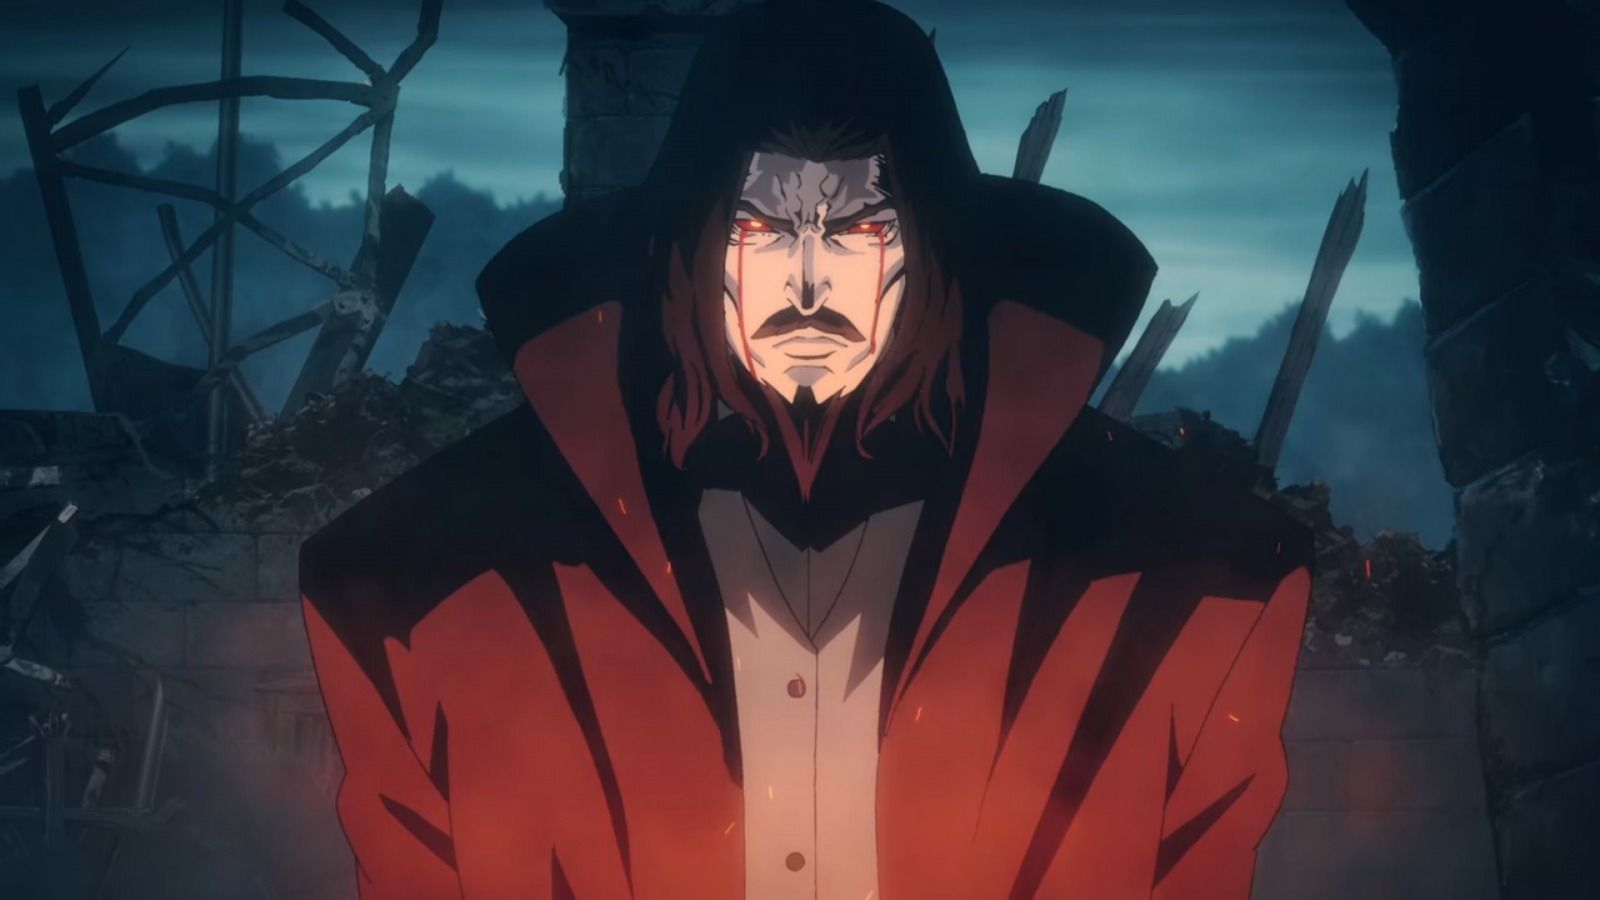 The Horror Adventure Anime Blood Of Zeus Fans Need To Watch Next